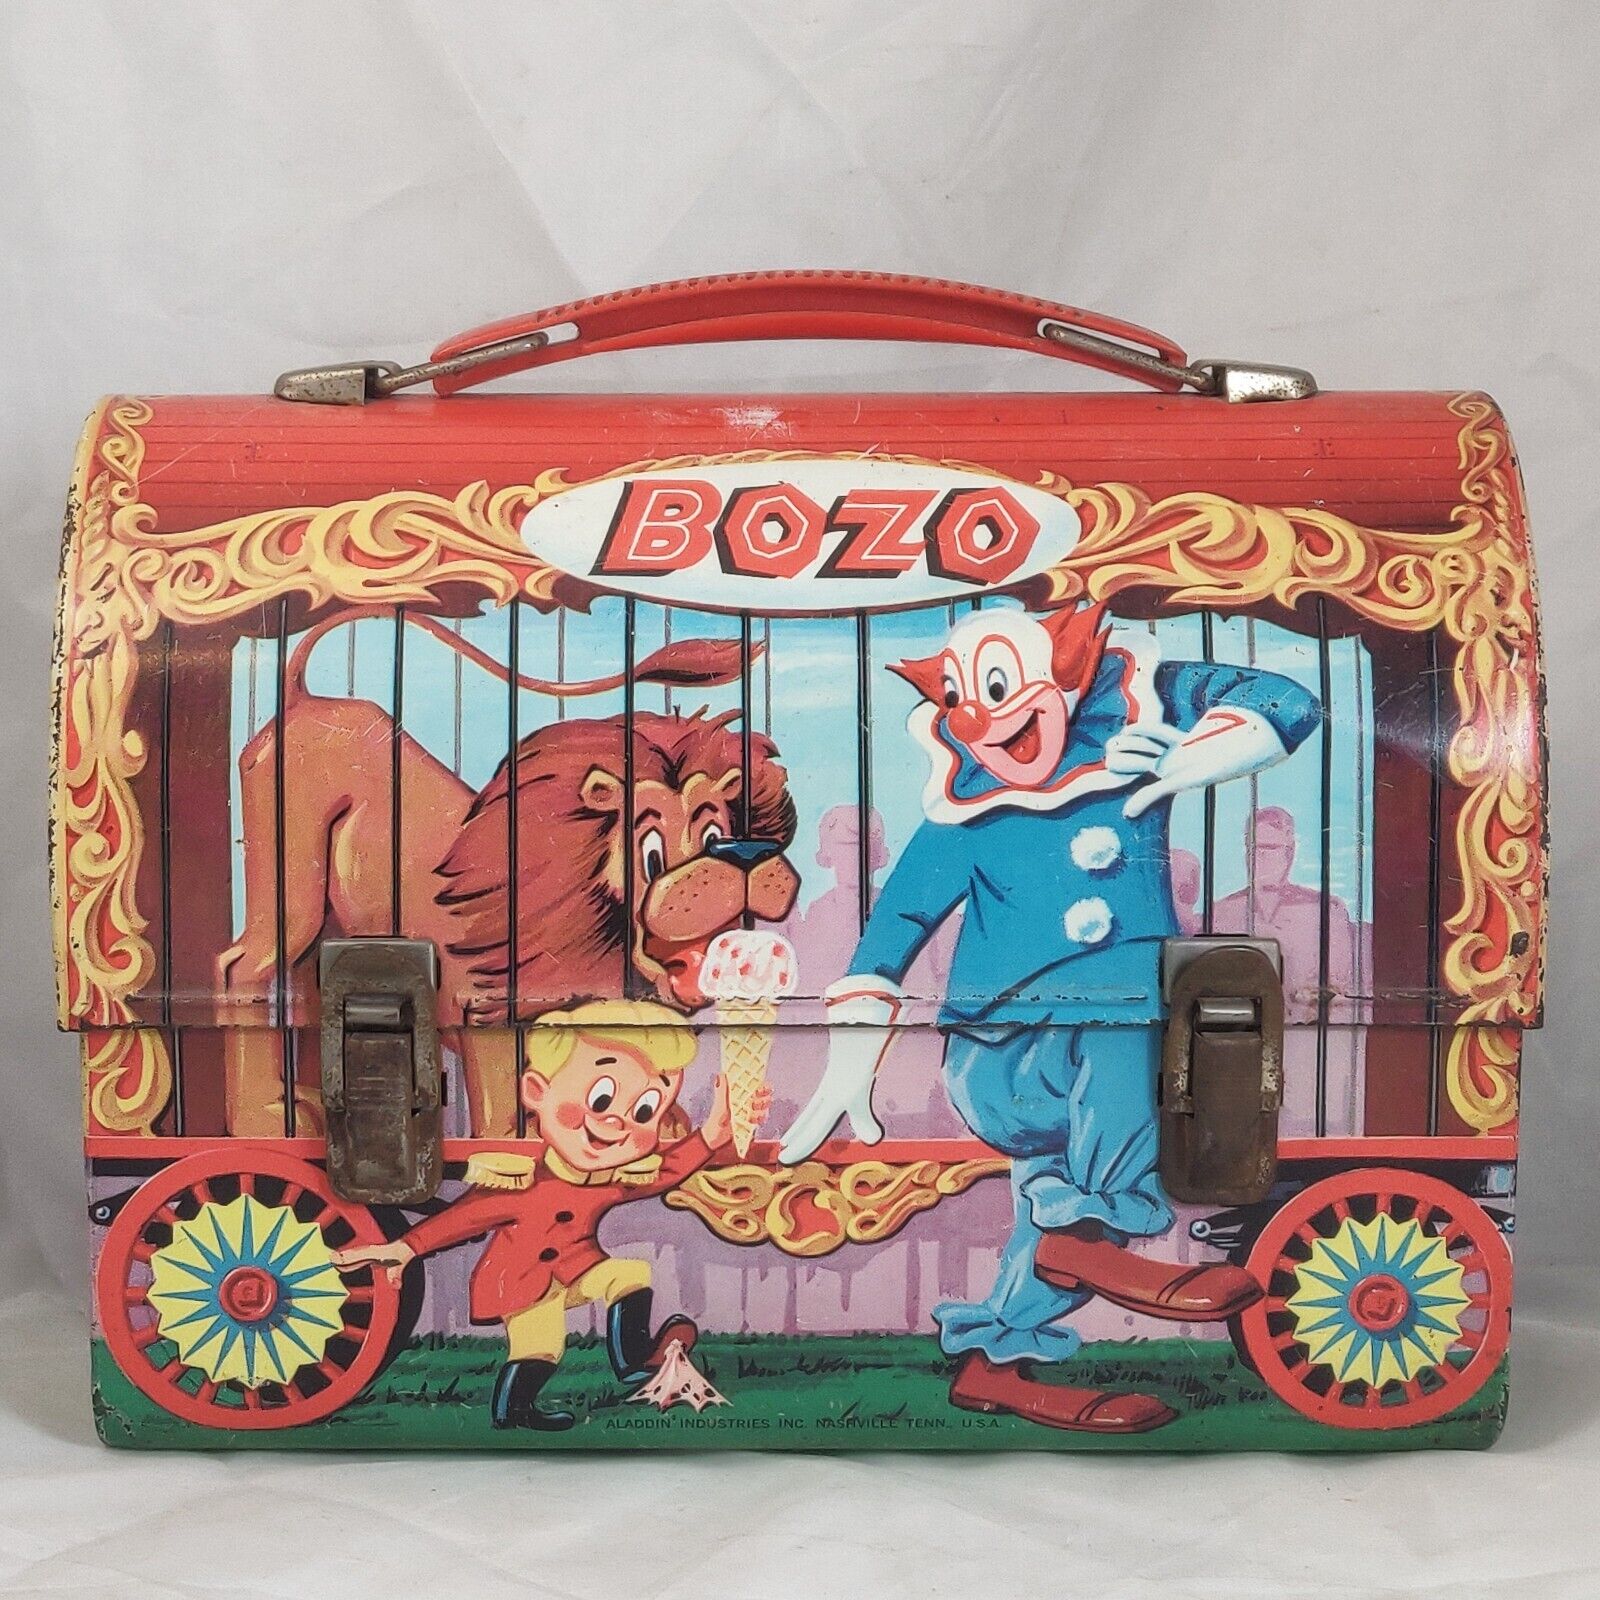 Vintage 1963 Bozo the Clown Metal Dome Lunchbox By Aladdin lunch box